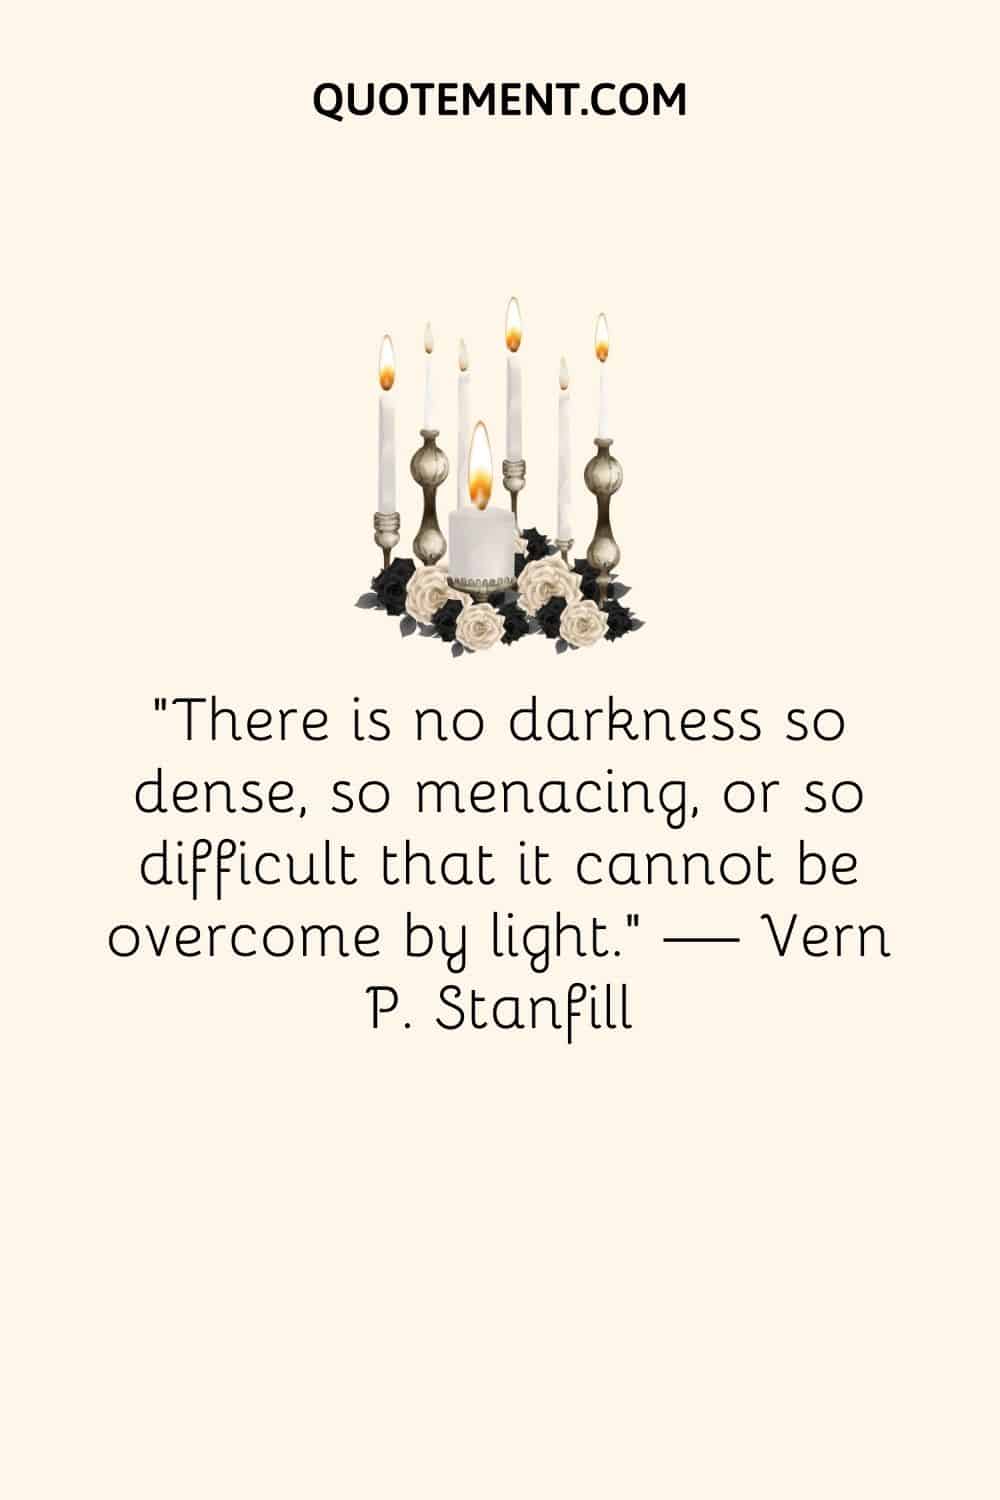 “There is no darkness so dense, so menacing, or so difficult that it cannot be overcome by light.” — Vern P. Stanfill